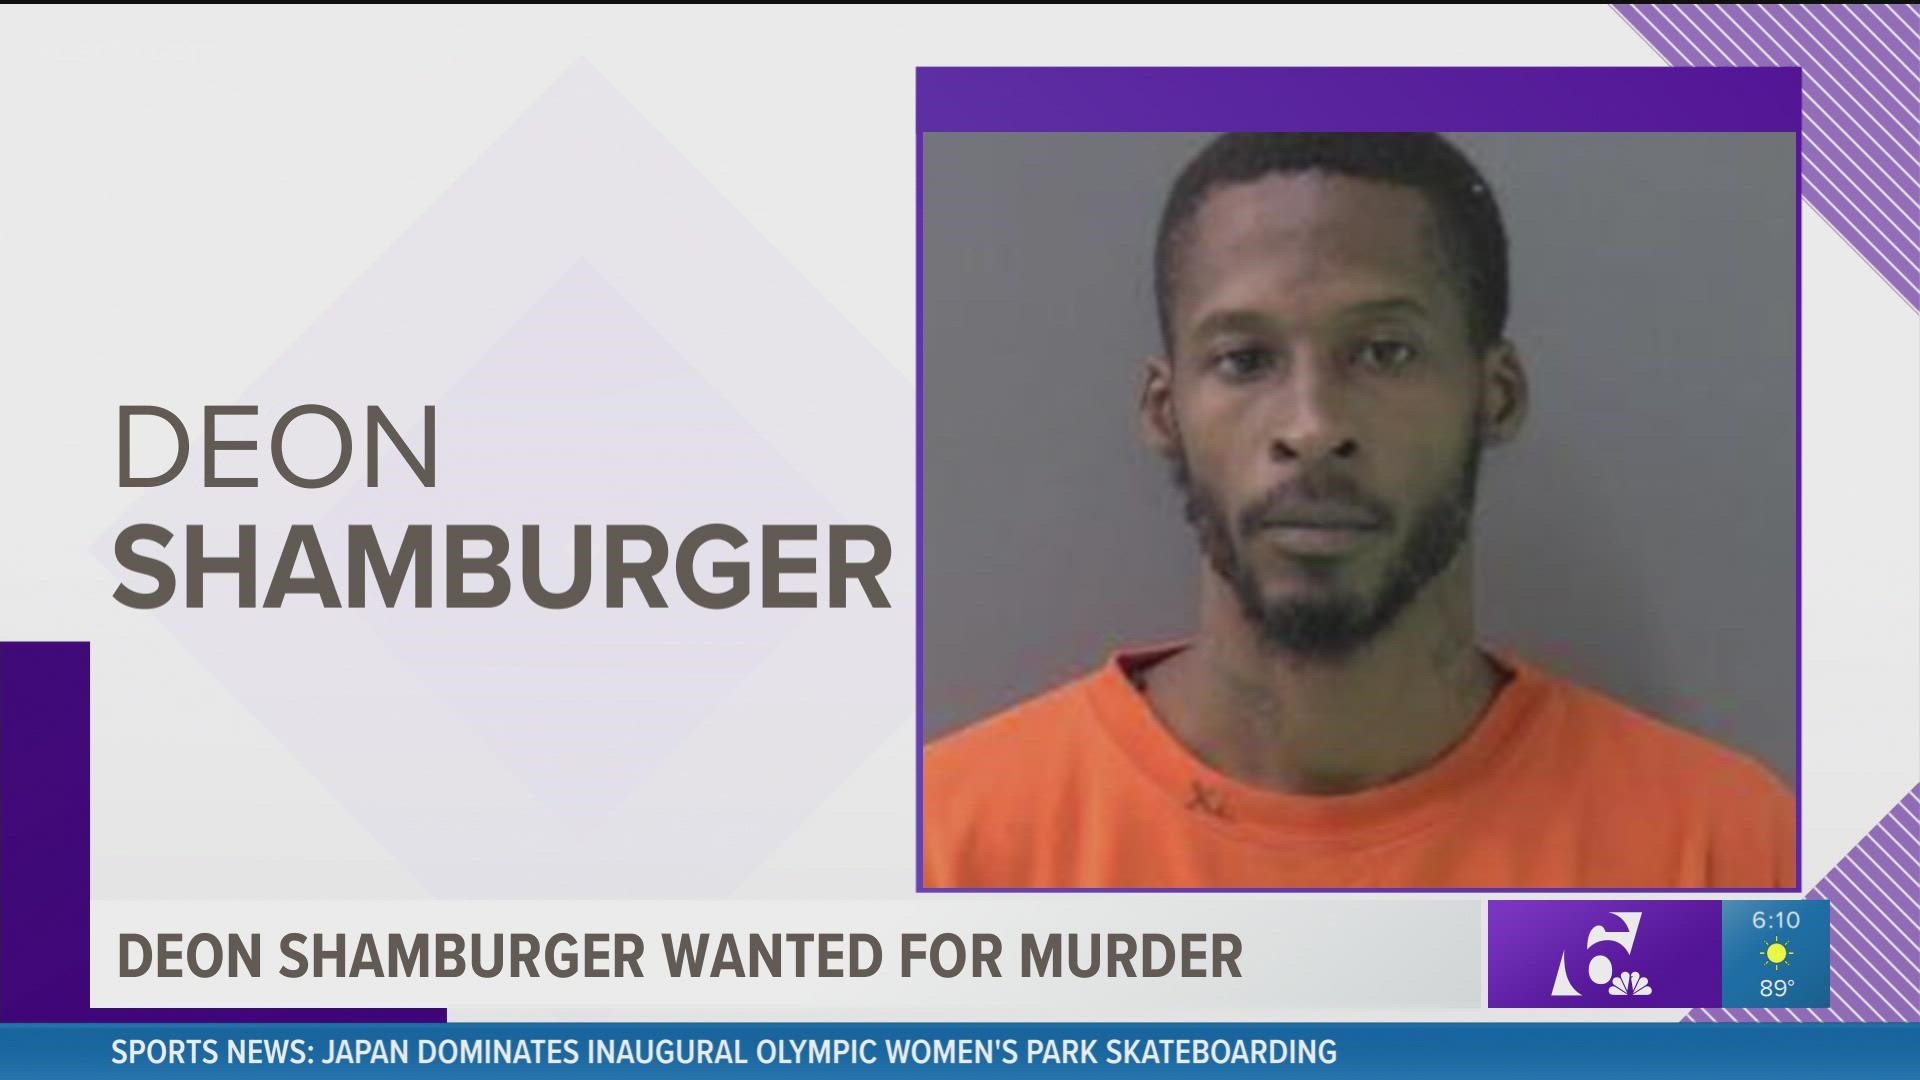 Police say 34-year-old Deon Shamburger murdered Jamel Jones on July 30 around 3:11 p.m. after a "personal dispute" in the 1100 block of Shady Lane.